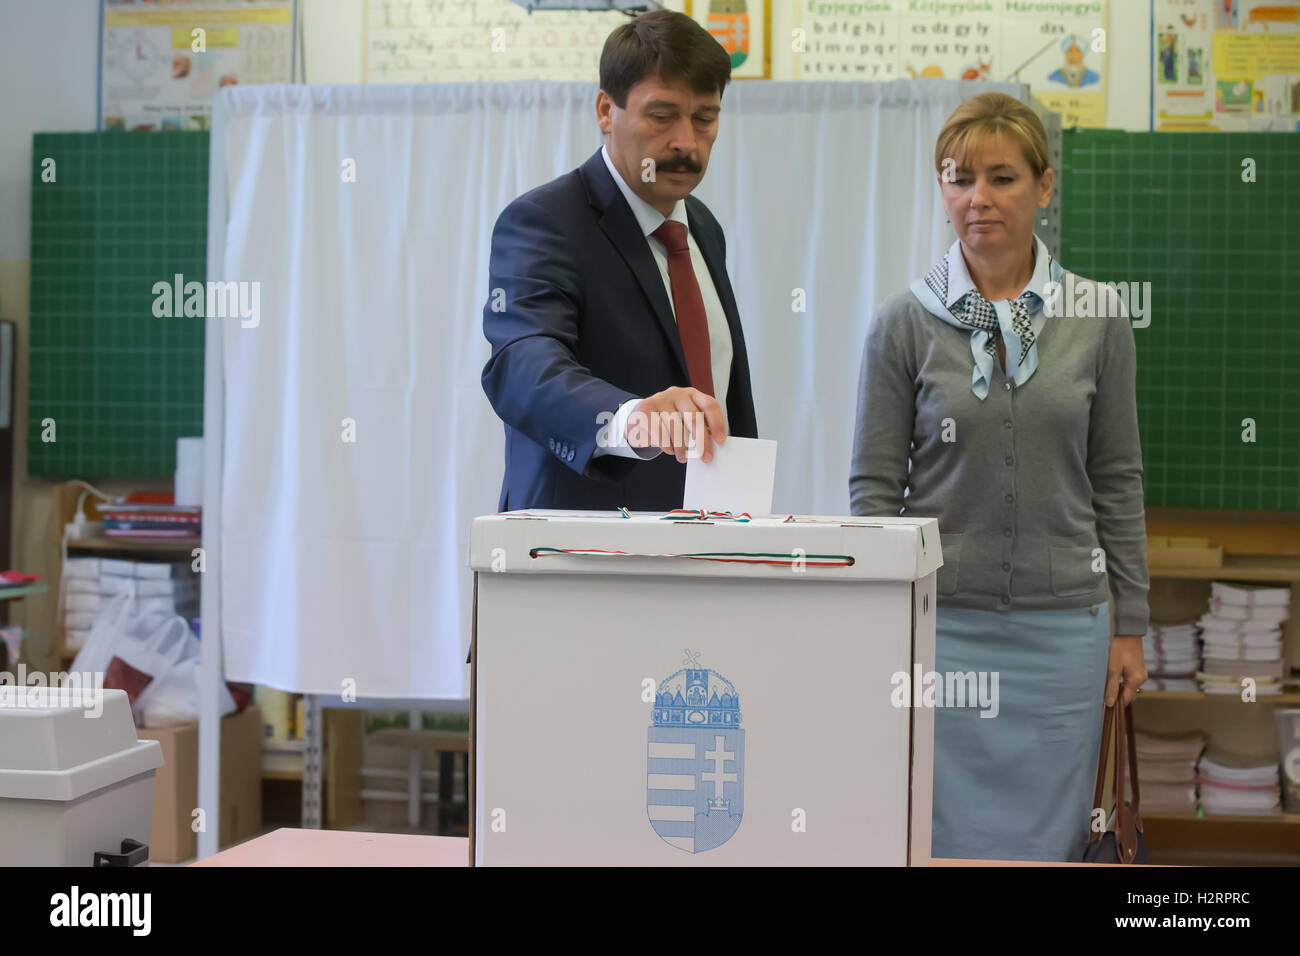 (161002) -- BUDAPEST, Oct. 2, 2016 (Xinhua) -- Hungarian President Janos Ader casts vote during a referendum on EU migrant quotas at a polling station in Budapest, Hungary, on Oct. 2, 2016. Polling stations across Hungary opened at 6 a.m. local time (0400 GMT) on Sunday for a government-sponsored anti-migrant referendum, initiated to counter an EU plan to distribute asylum seekers among its member states. (Xinhua/Attila Volgyi) (zy) Stock Photo